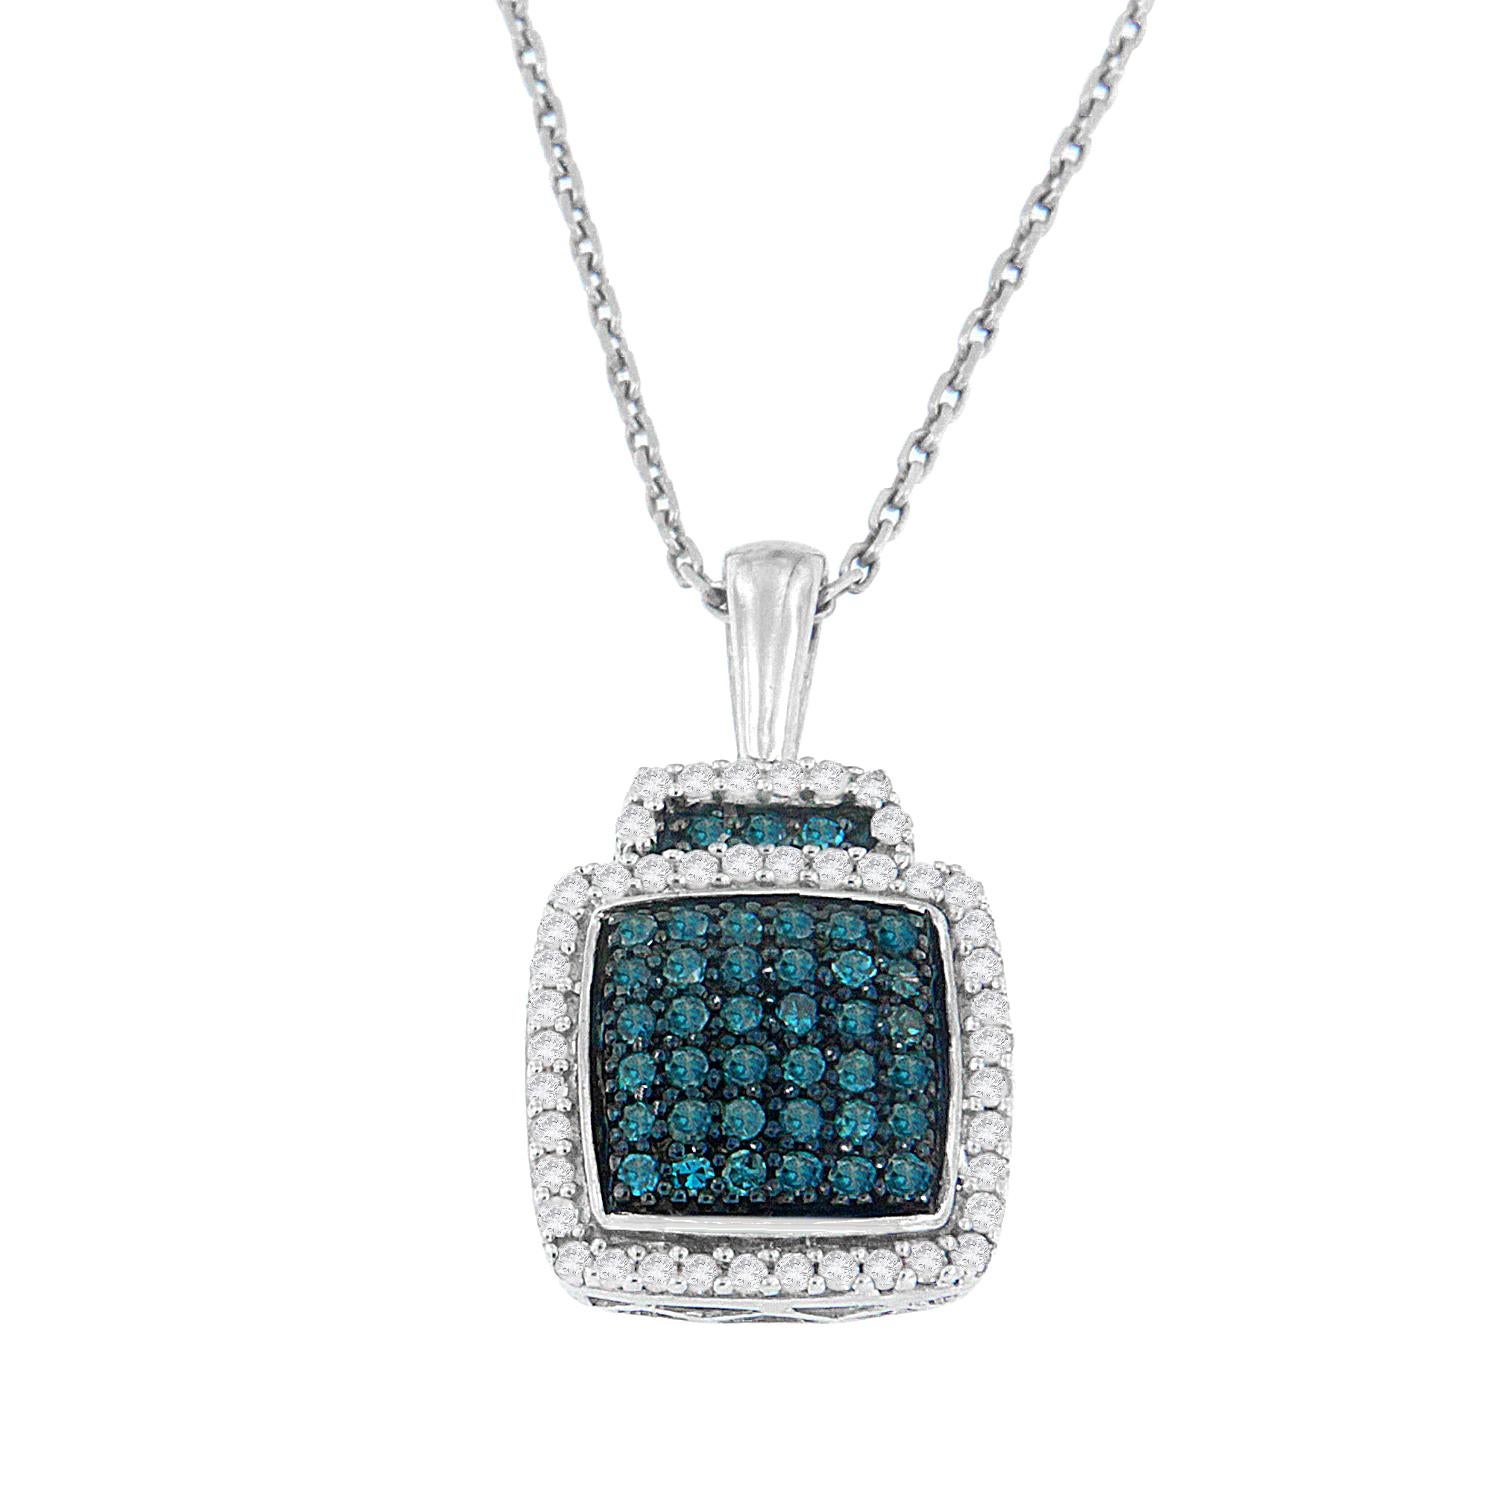 Set in a square shaped basket design and adorned with filigree details on the sides, this diamonds pendant is a true statement piece. A center cluster of deep blue, color treated, round cut diamonds sparkle inside a dazzling halo of white round